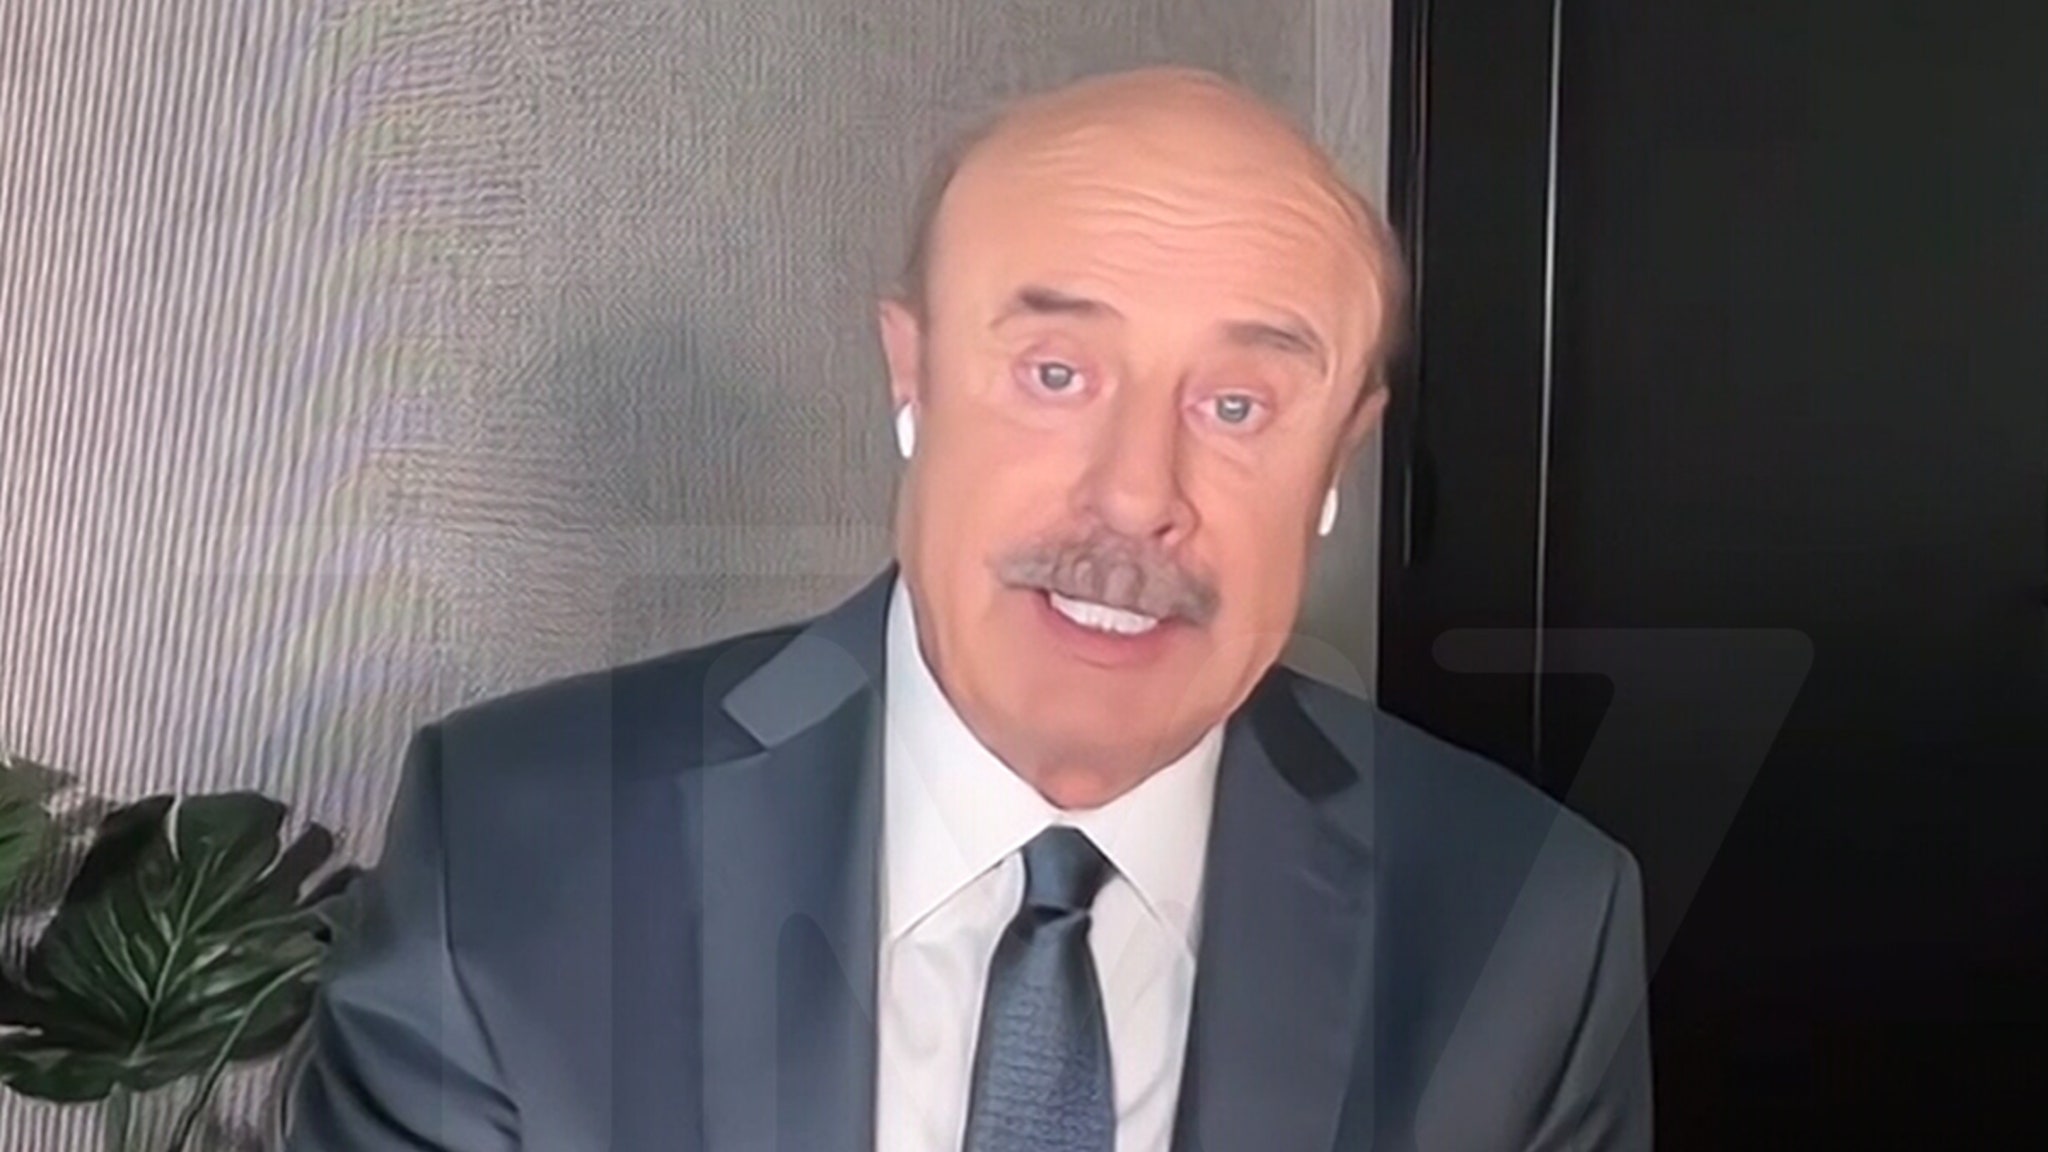 Dr.  Phil says Trump's trial jury is worrying for prosecution and defense